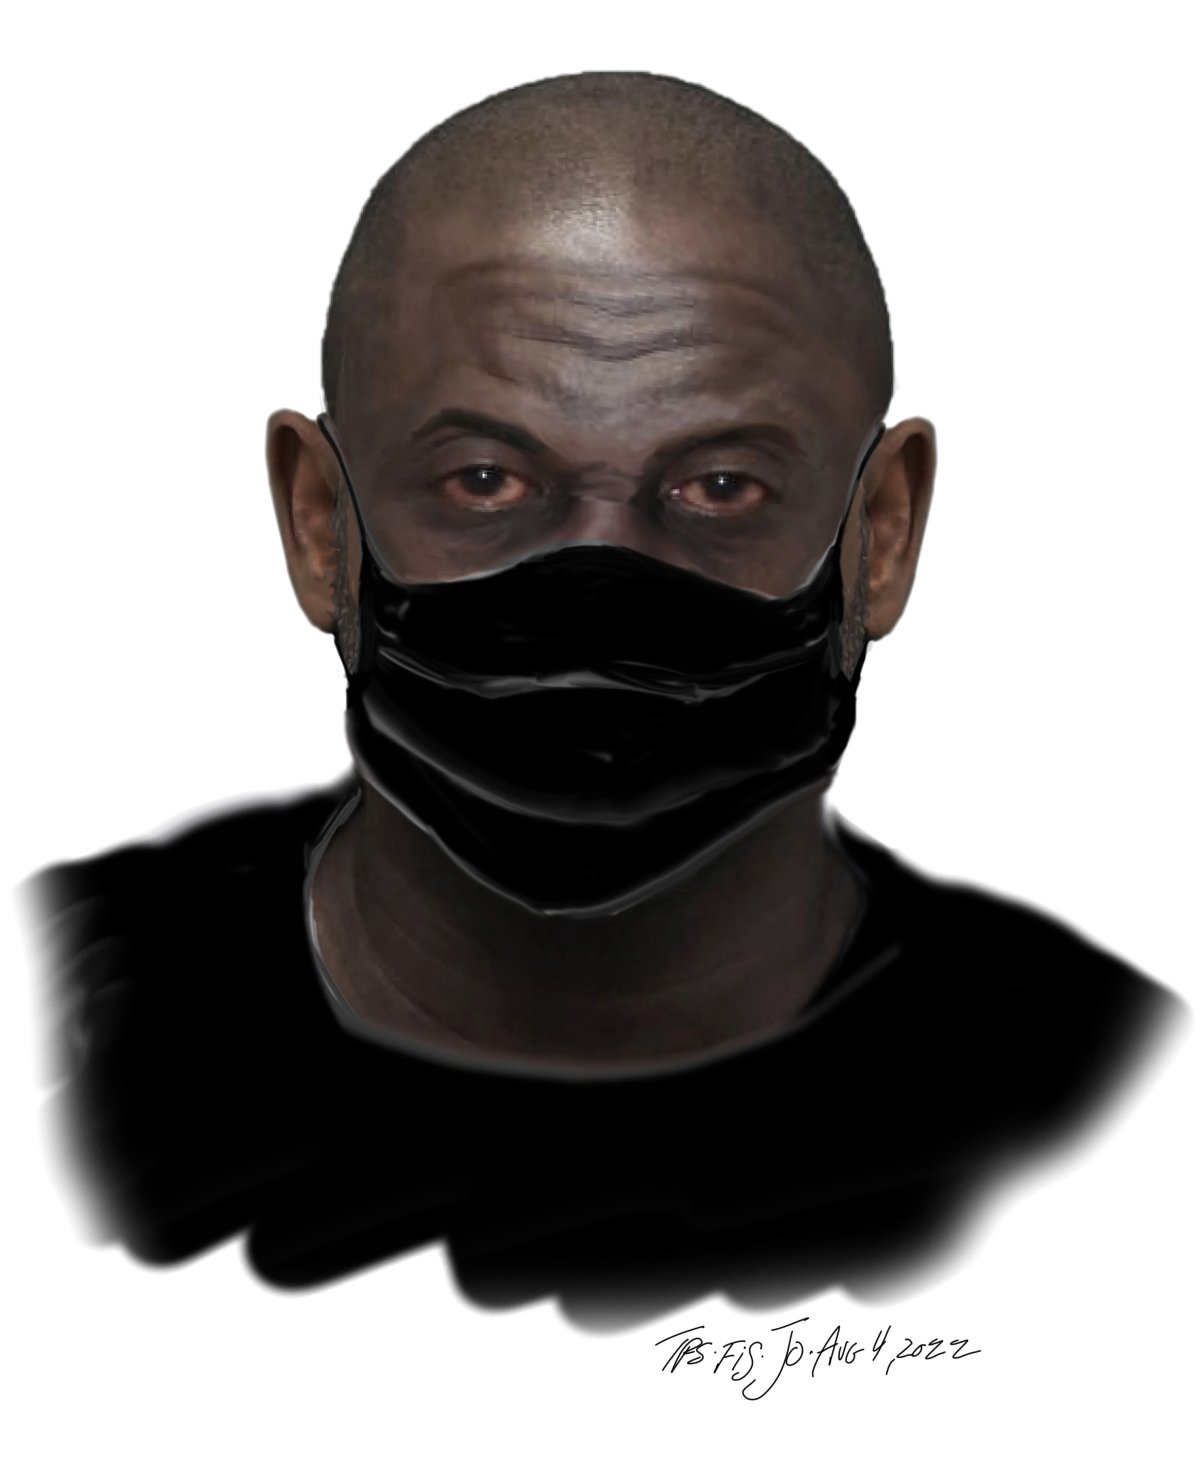 Police have released a sketch of a suspect wanted in connection with a sexual assault investigation in Toronto.